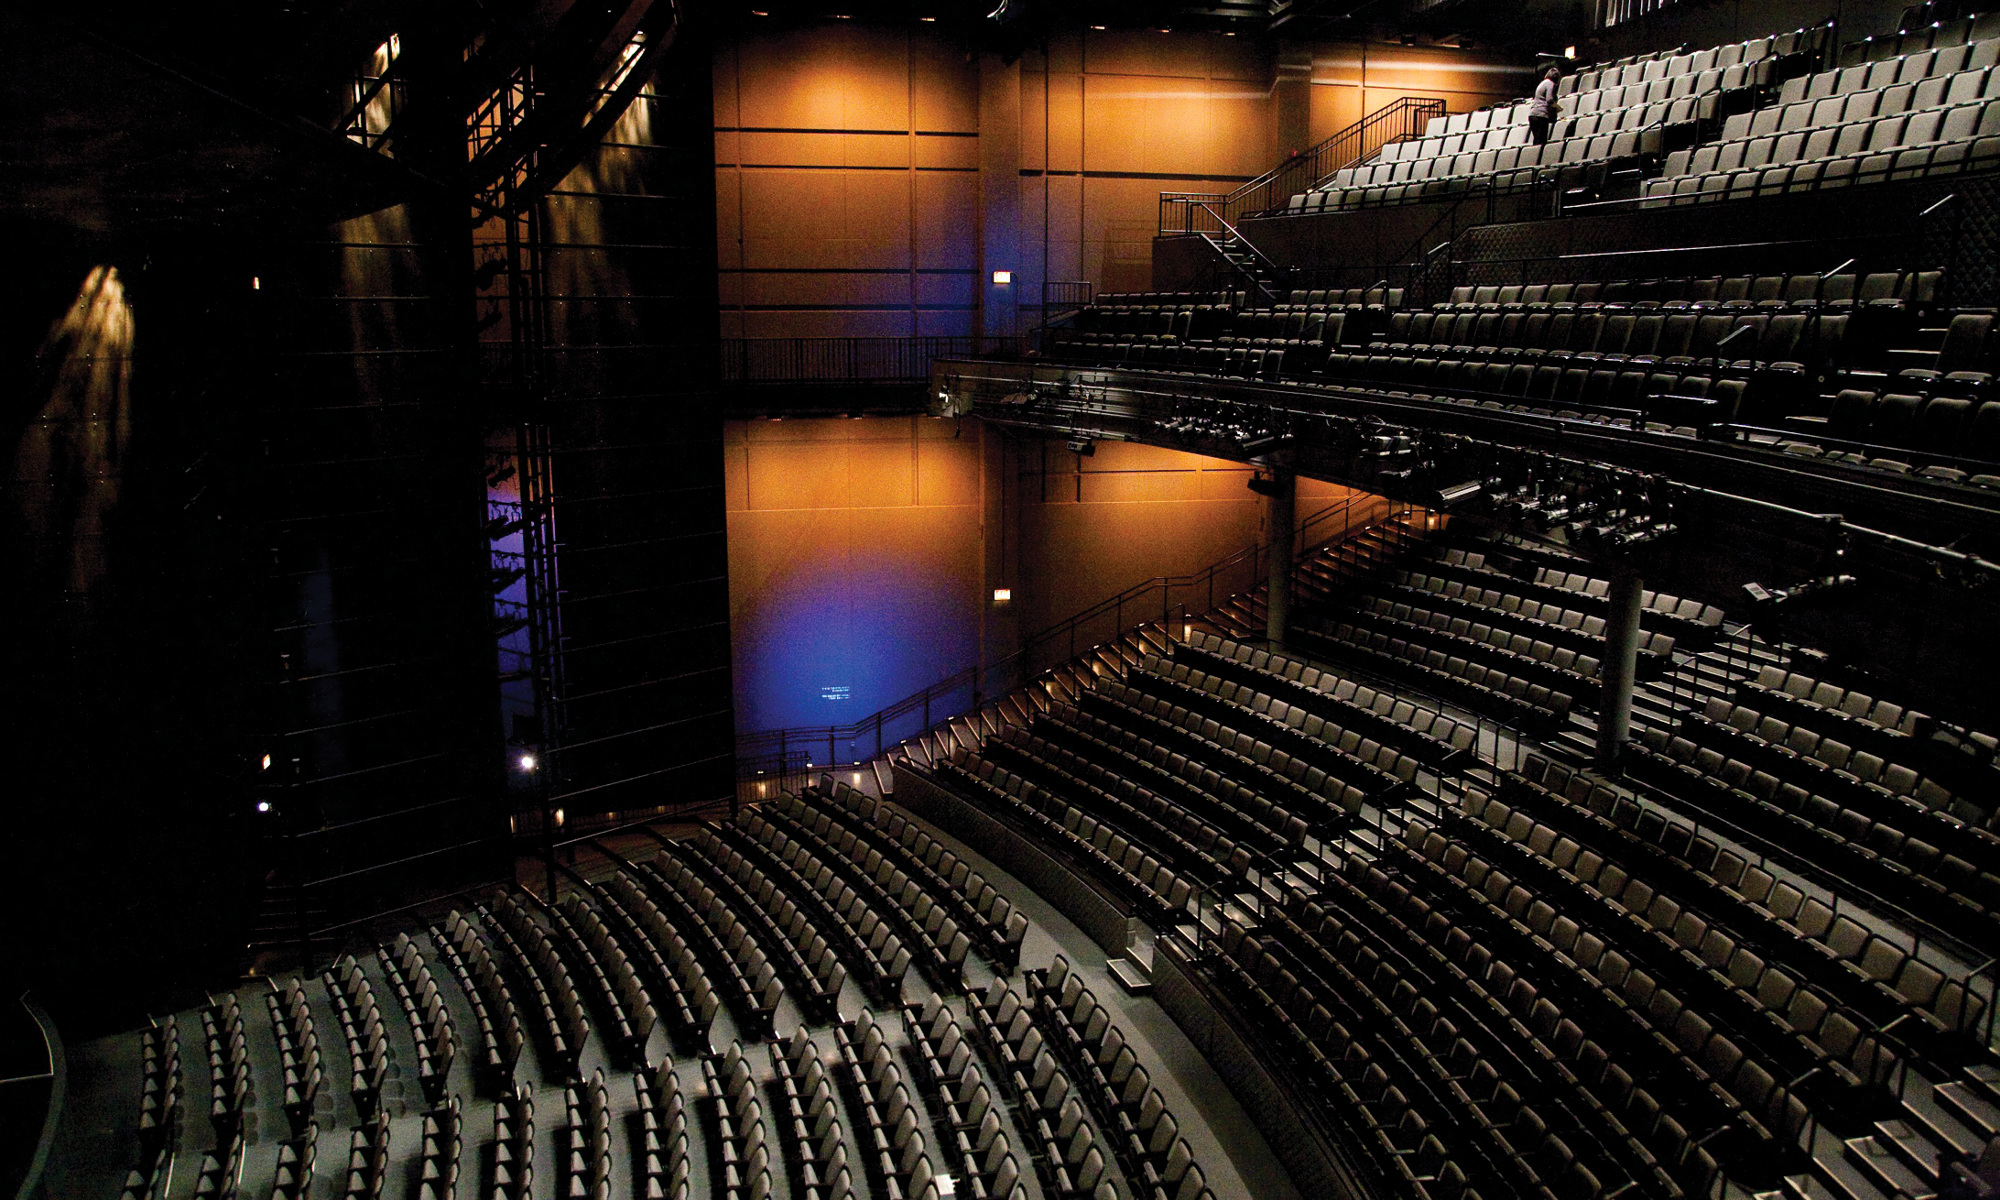 An image of the Harris Theater seats